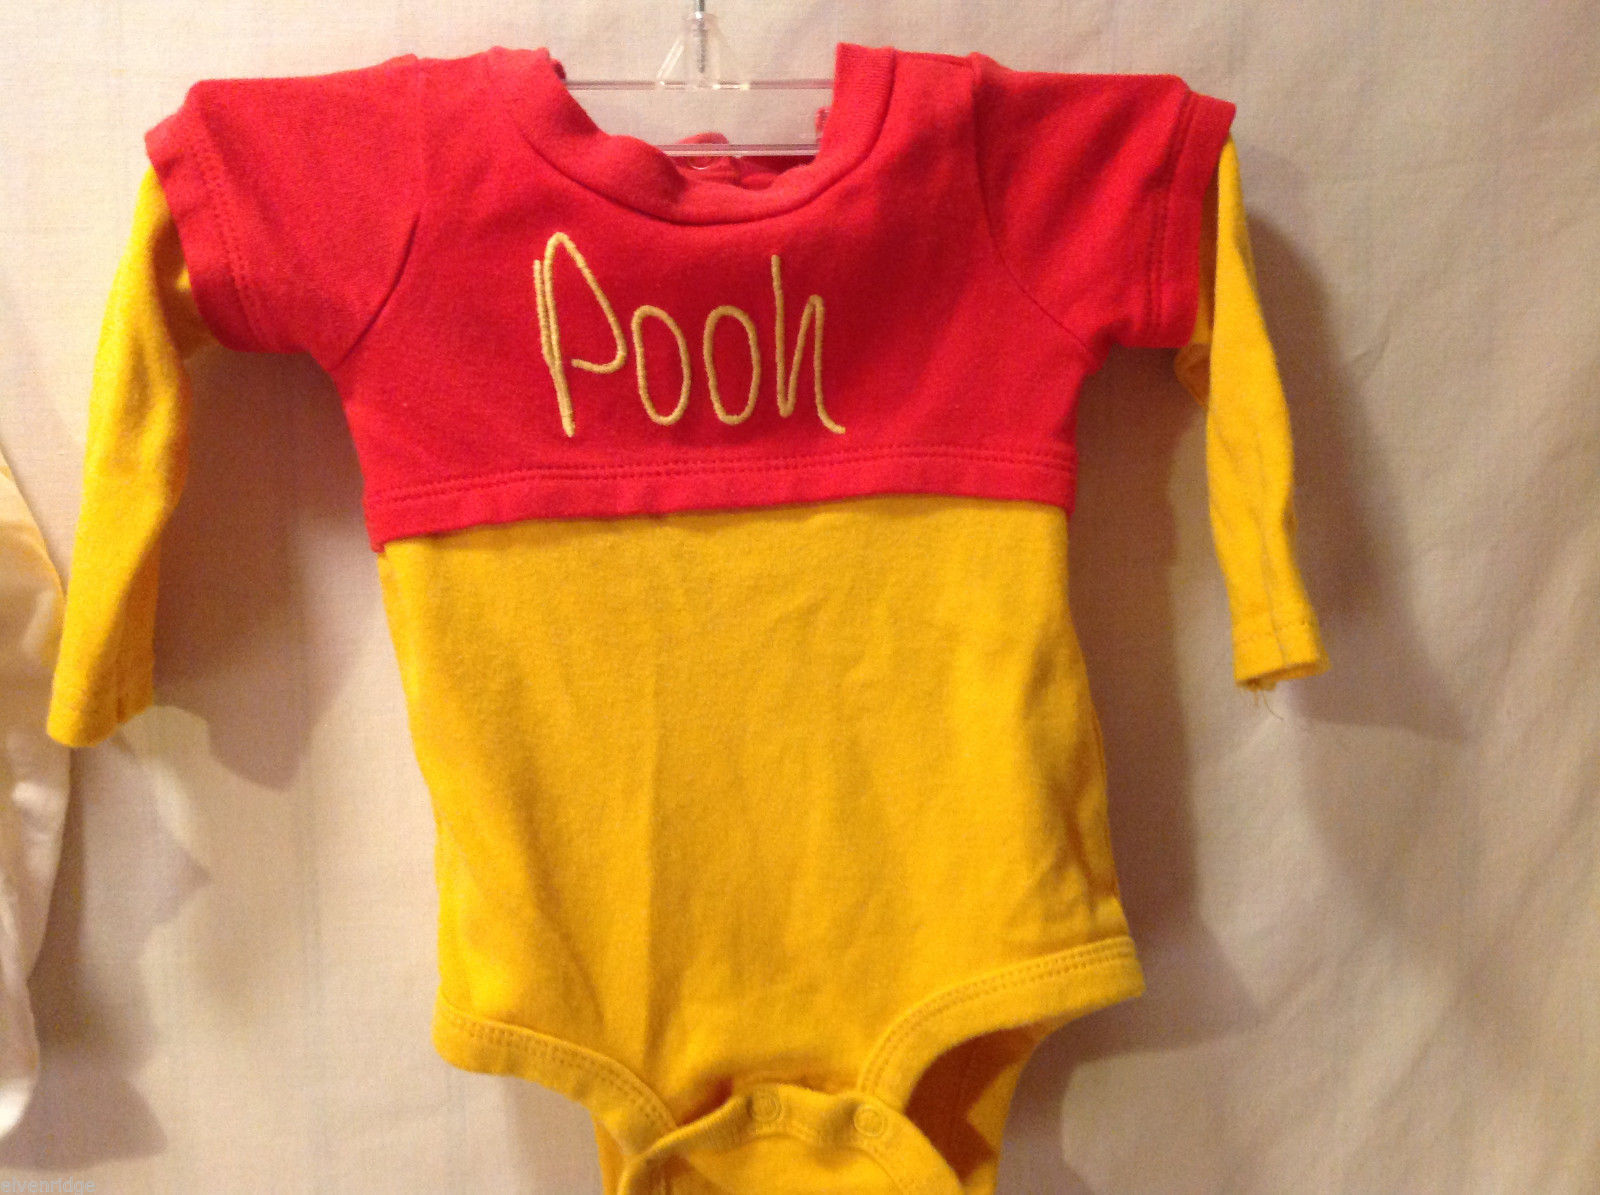 h&m pooh bear outfit